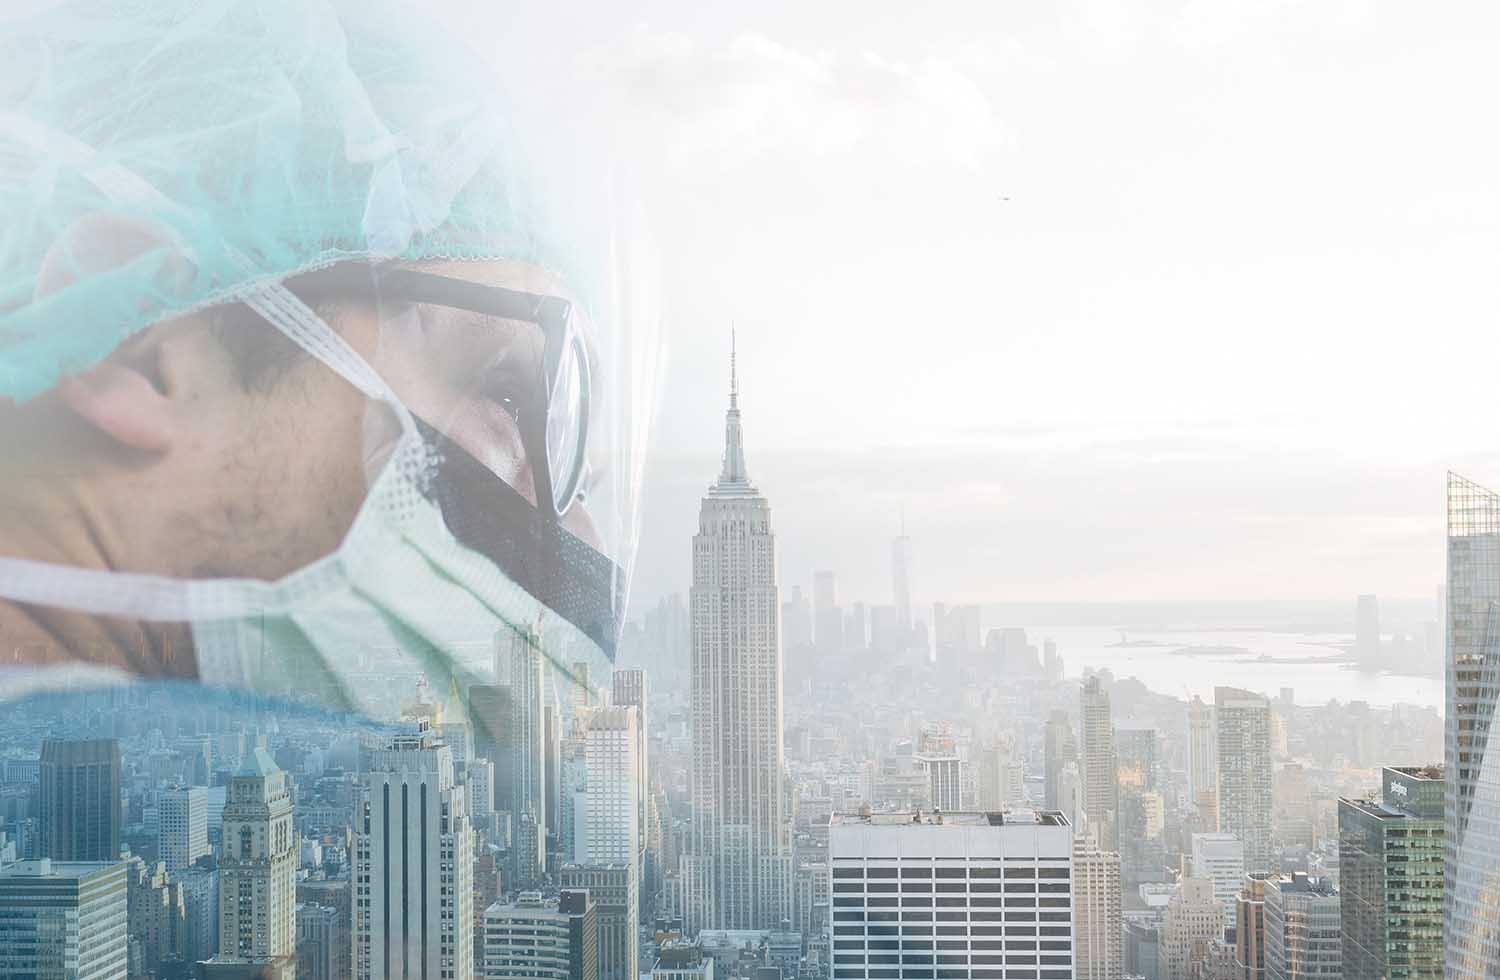 MEDPLI's 2020 Guide to Medical Malpractice Insurance in New York will help you with your medical malpractice insurance purchase